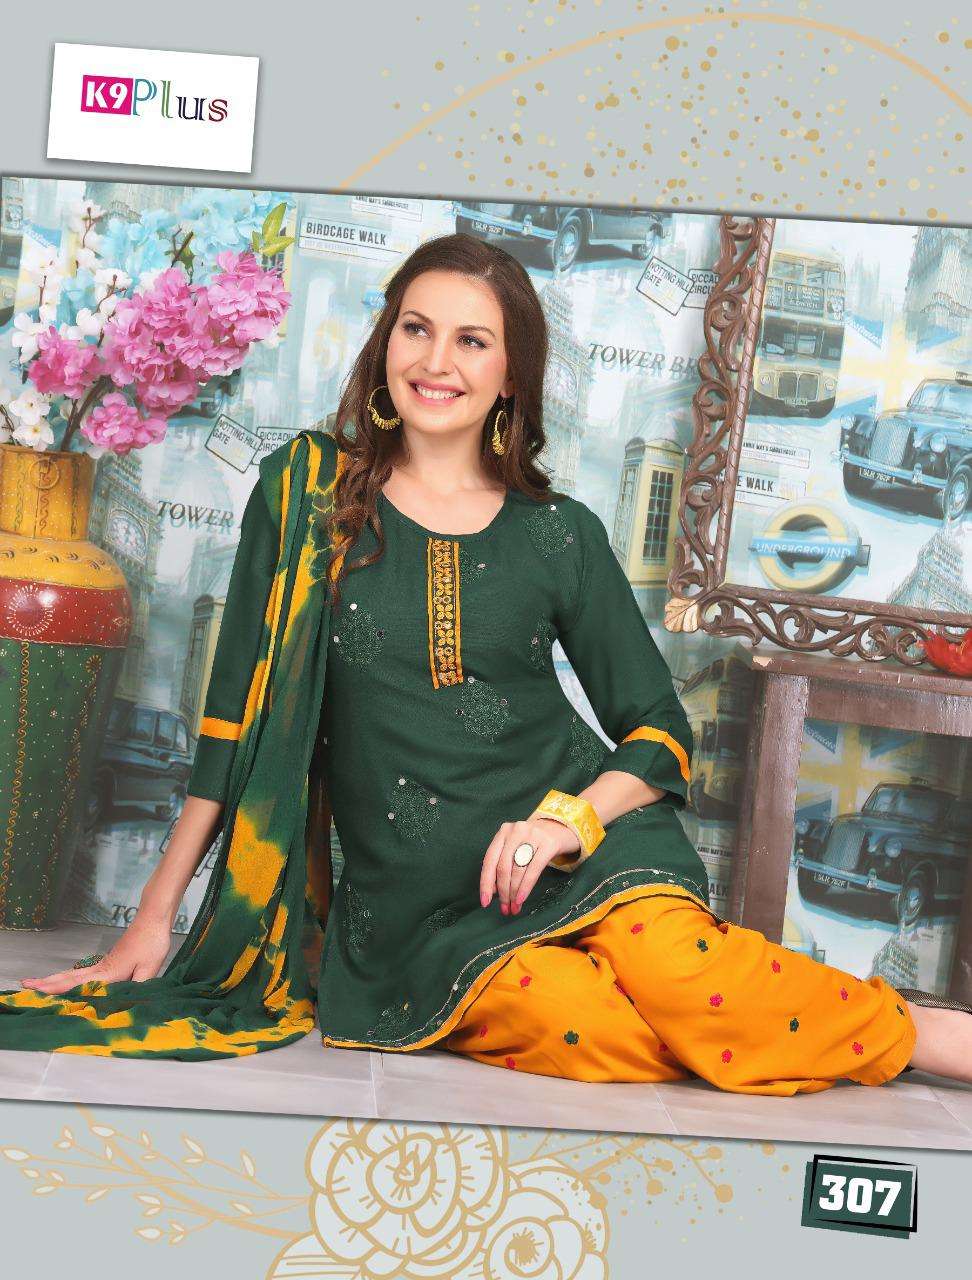 LADDO BY K9 PLUS 301 TO 308 SERIES BEAUTIFUL SUITS COLORFUL STYLISH FANCY CASUAL WEAR & ETHNIC WEAR RAYON EMBROIDERED DRESSES AT WHOLESALE PRICE